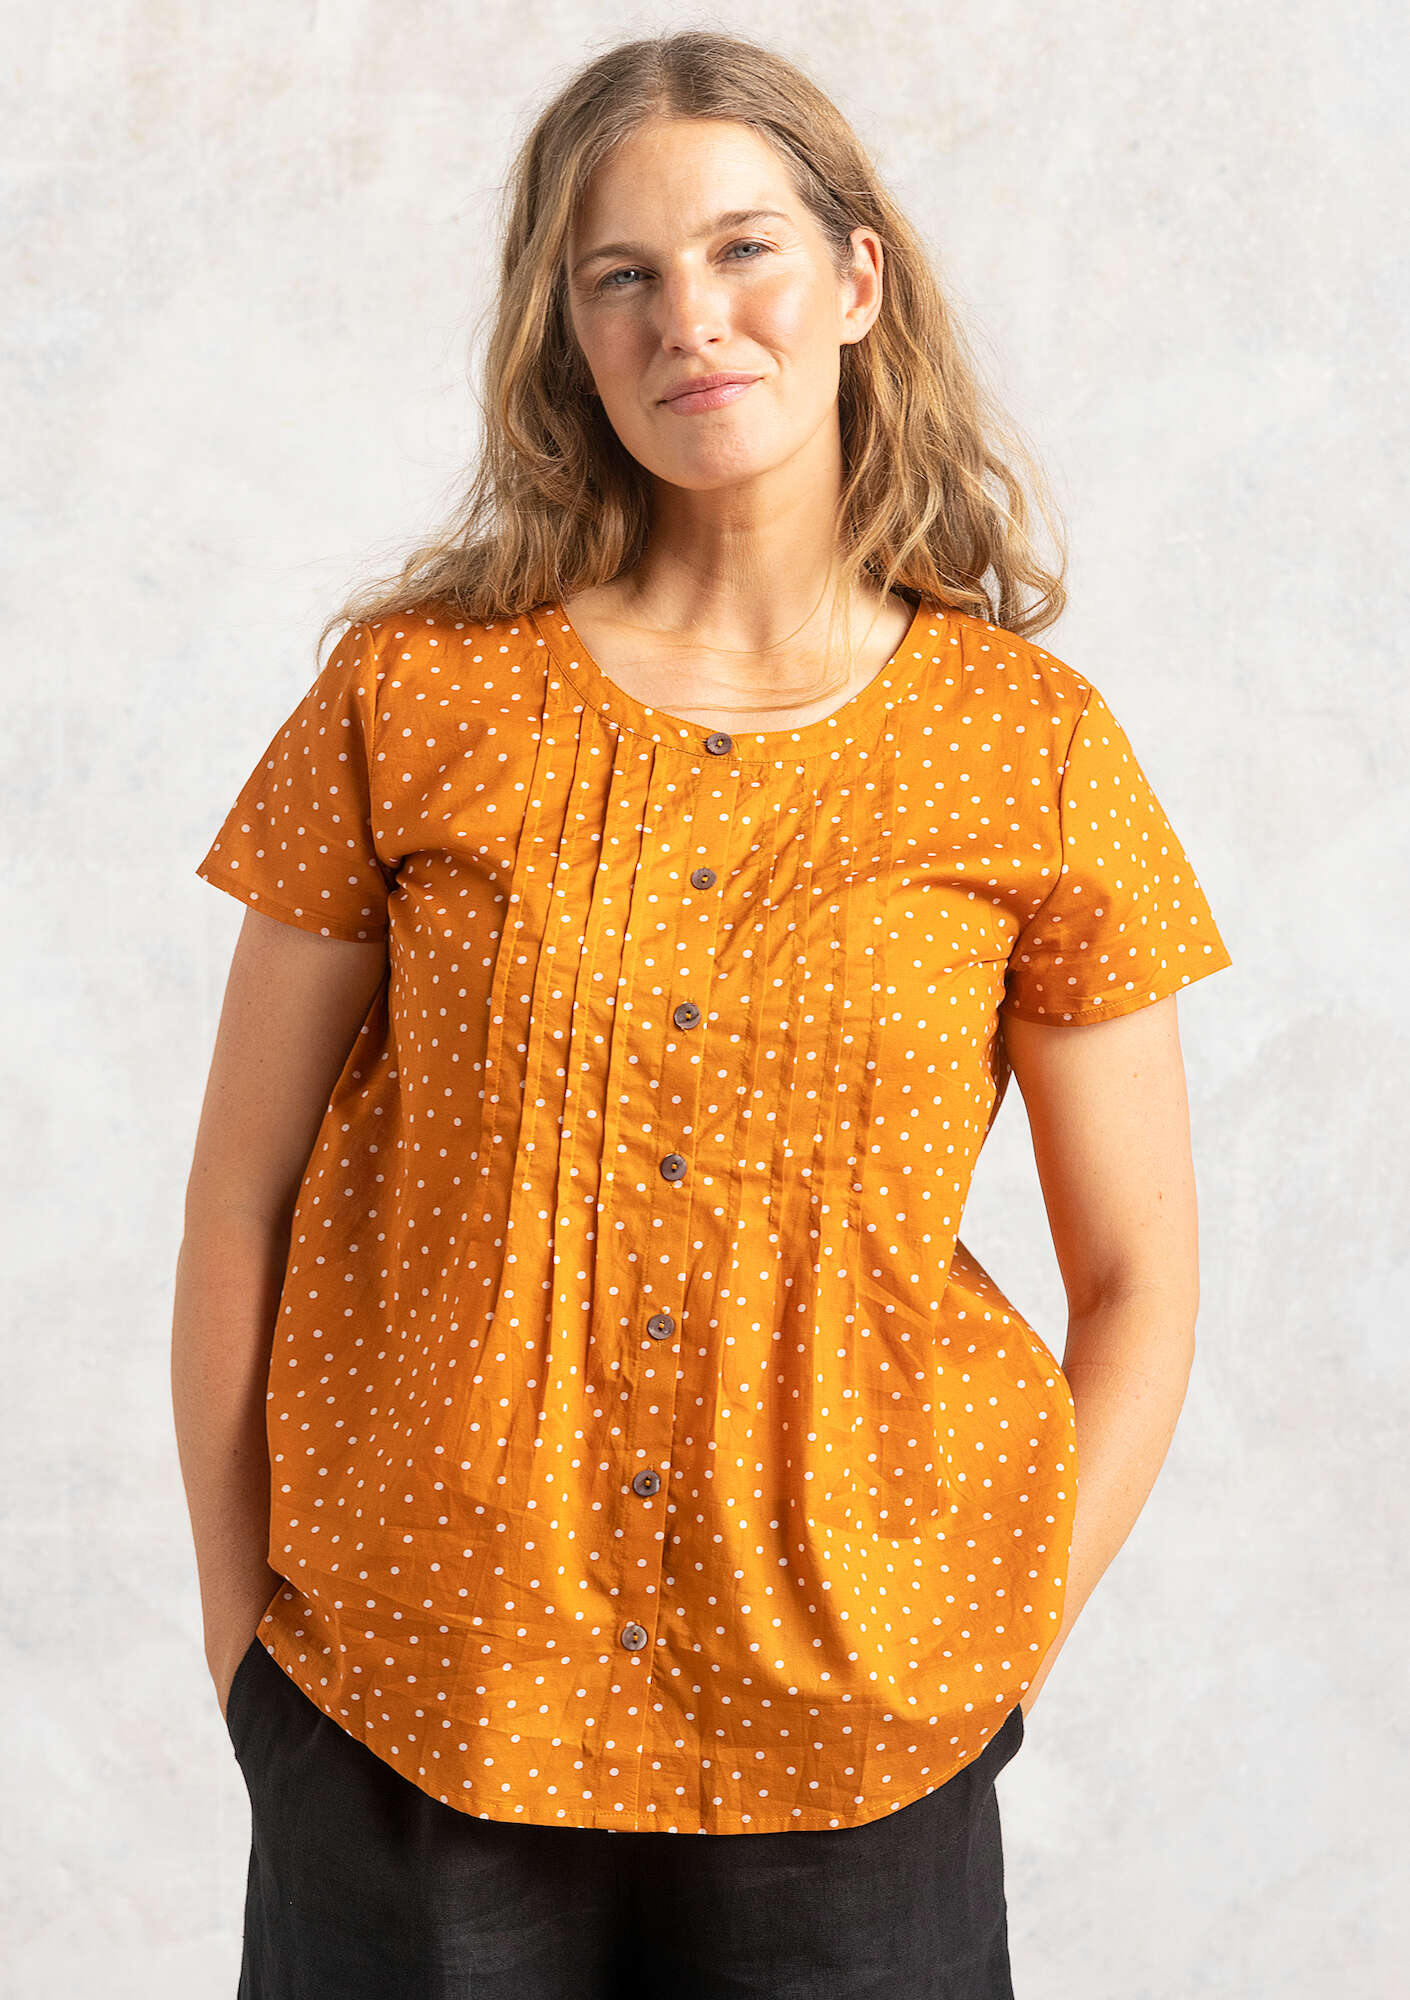 Pytte blouse amber/patterned